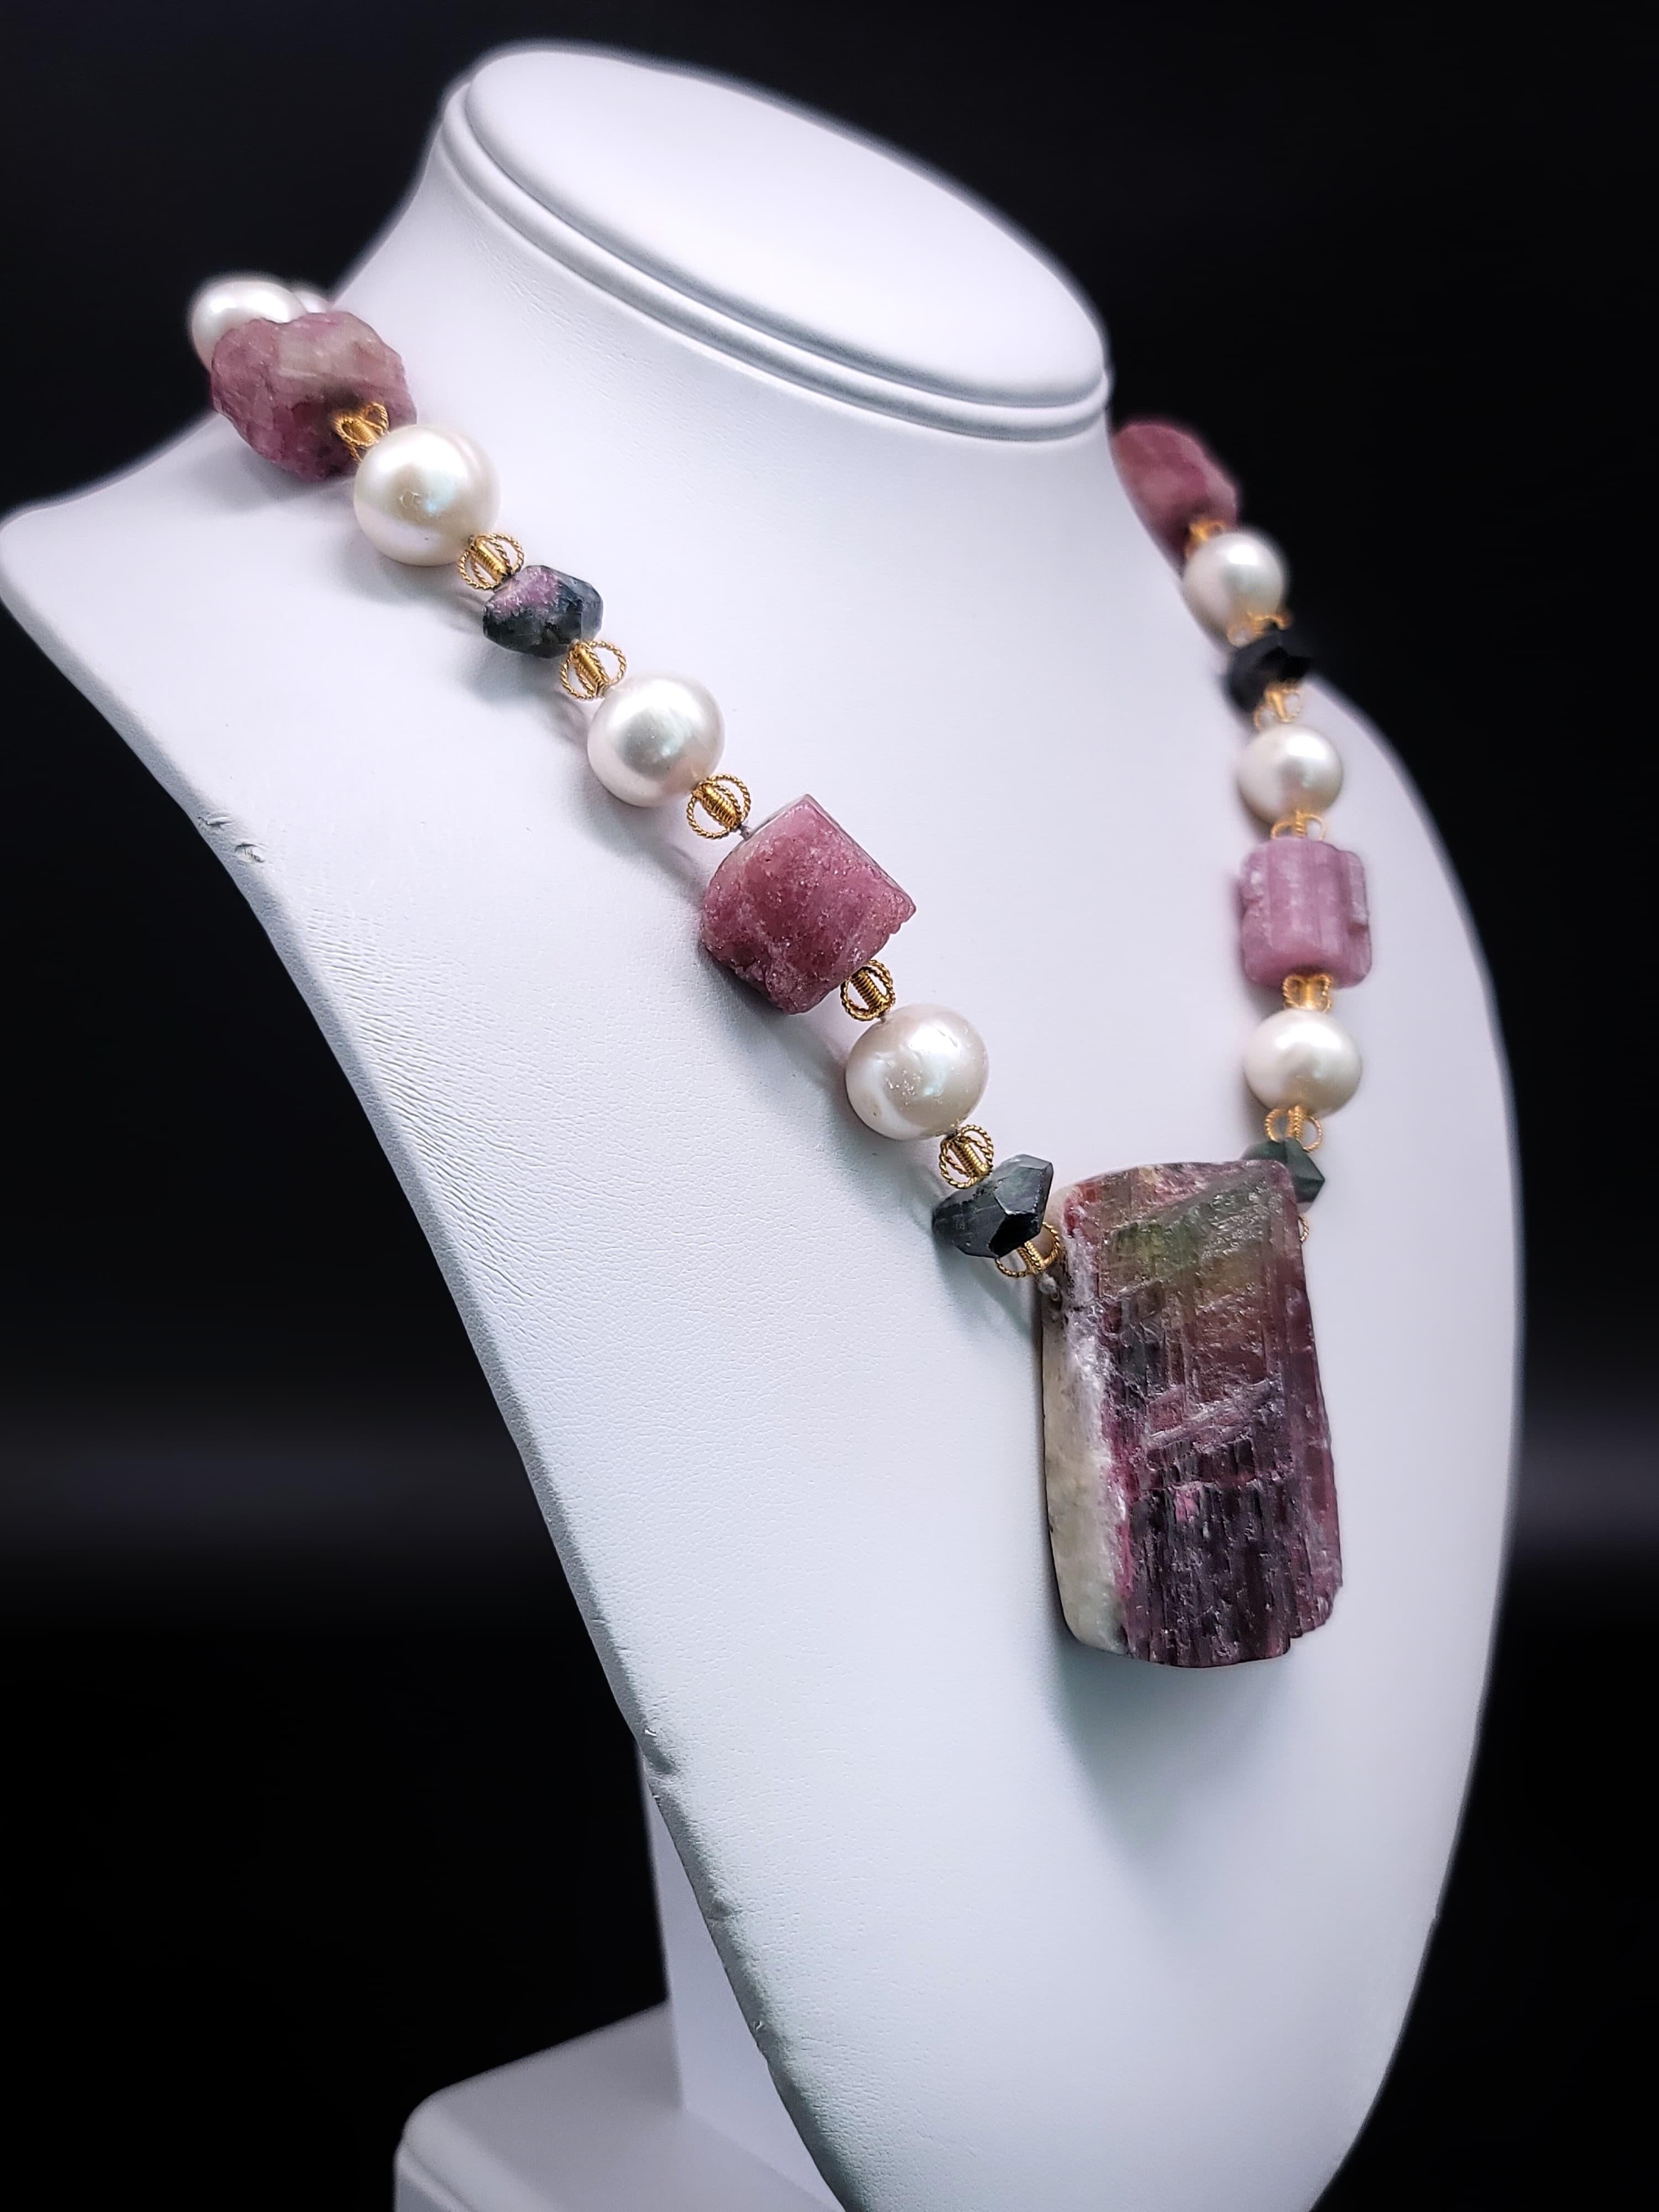 
Elevate your style with our one-of-a-kind Tourmaline Specimen Stone Pendant Necklace. This captivating piece seamlessly blends bold design with intricate details, making it a unique addition to your jewelry collection.

The focal point of this